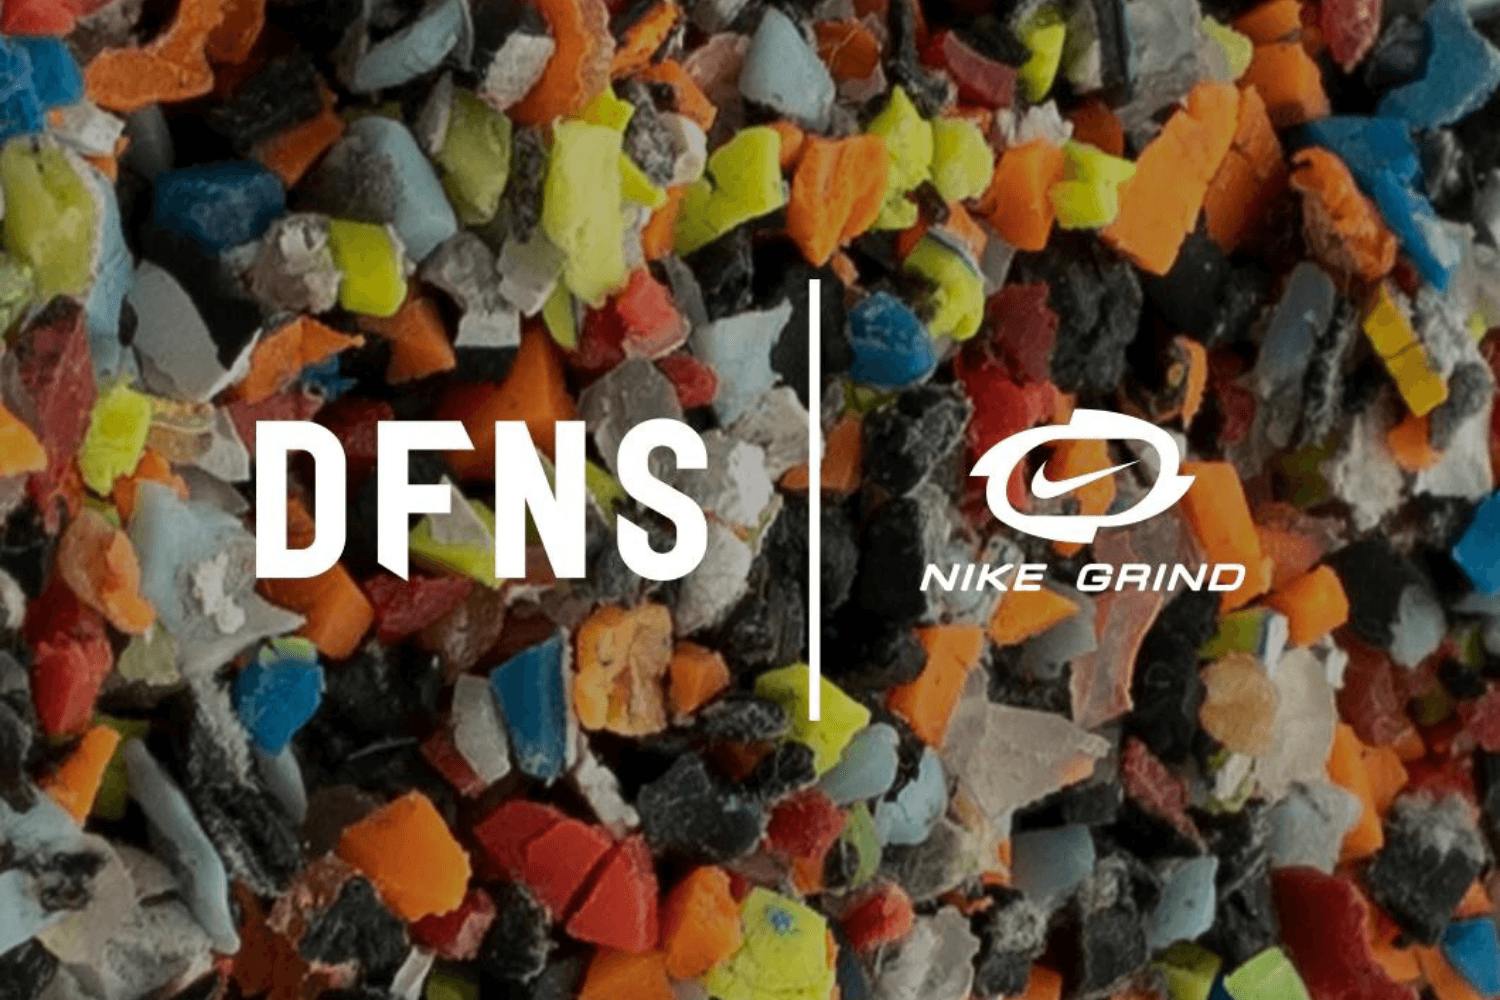 DFNS will use Nike Grind in their footwear care products